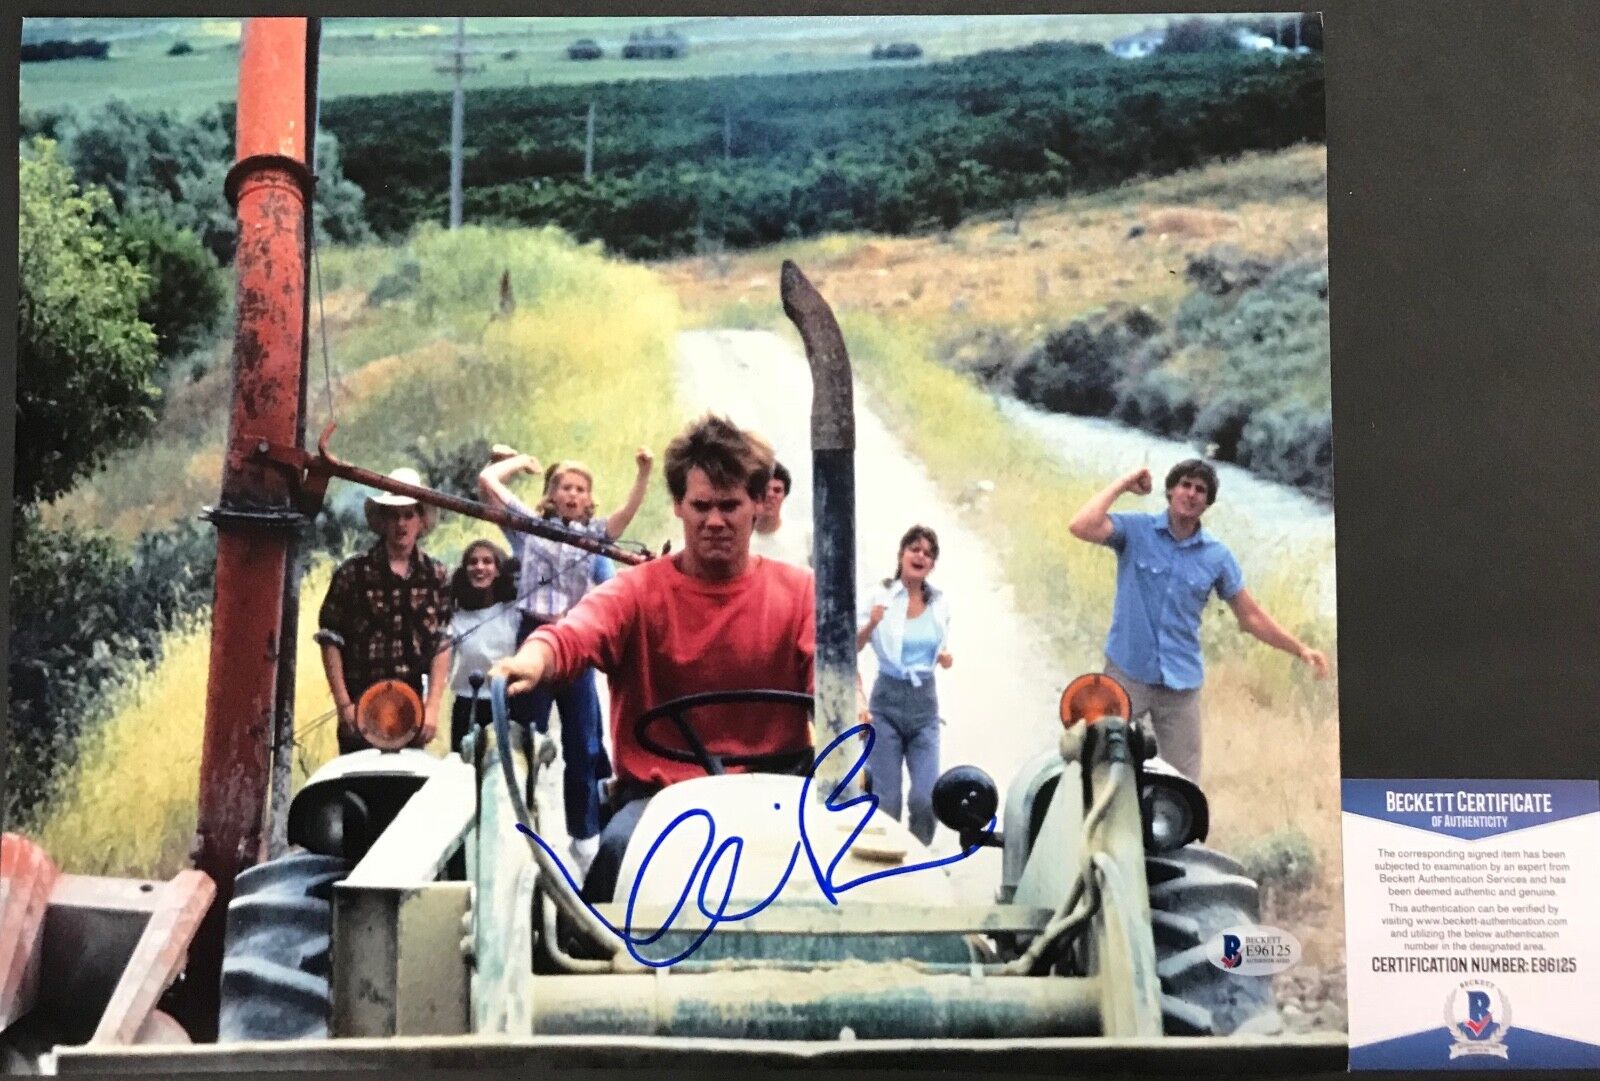 REN McCORMICK!!! Kevin Bacon Signed FOOTLOOSE 11x14 Photo Poster painting #2 Beckett BAS